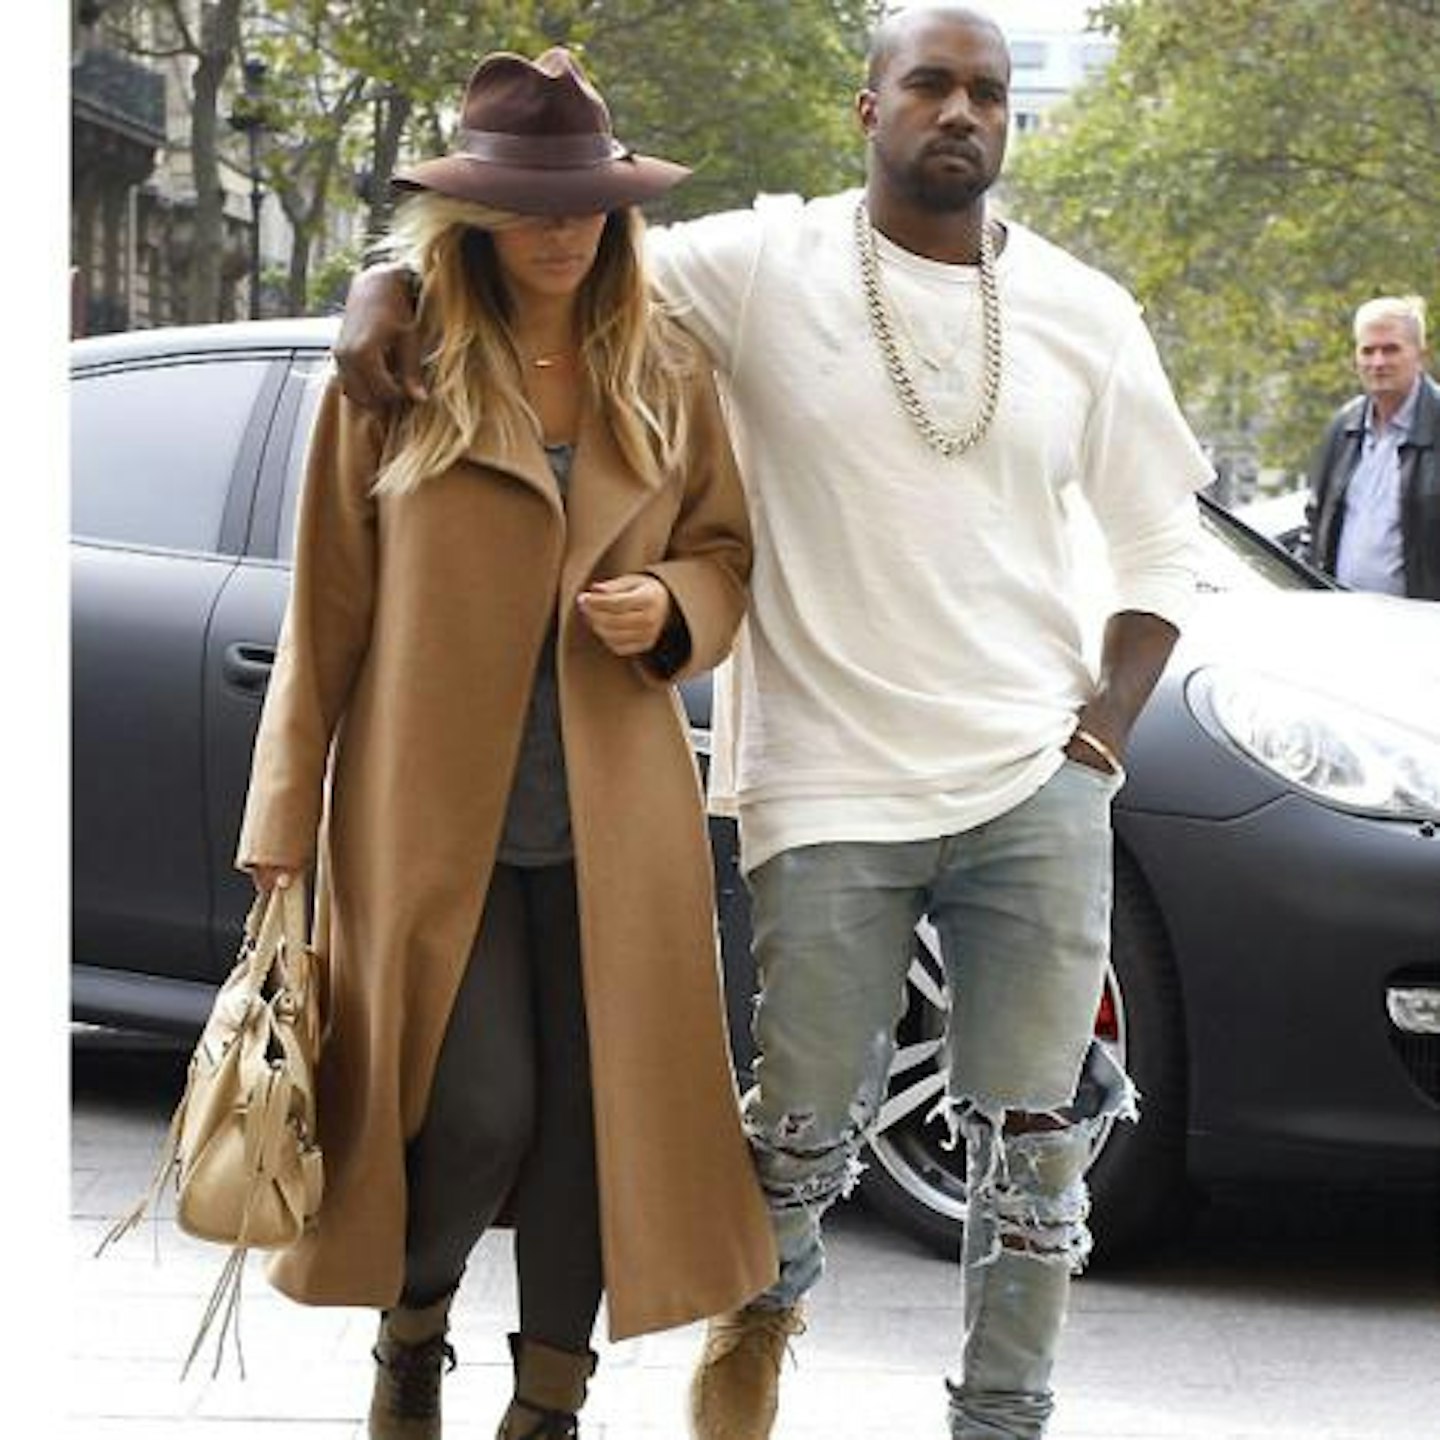 Kanye and Kim arriving in Paris on Saturday